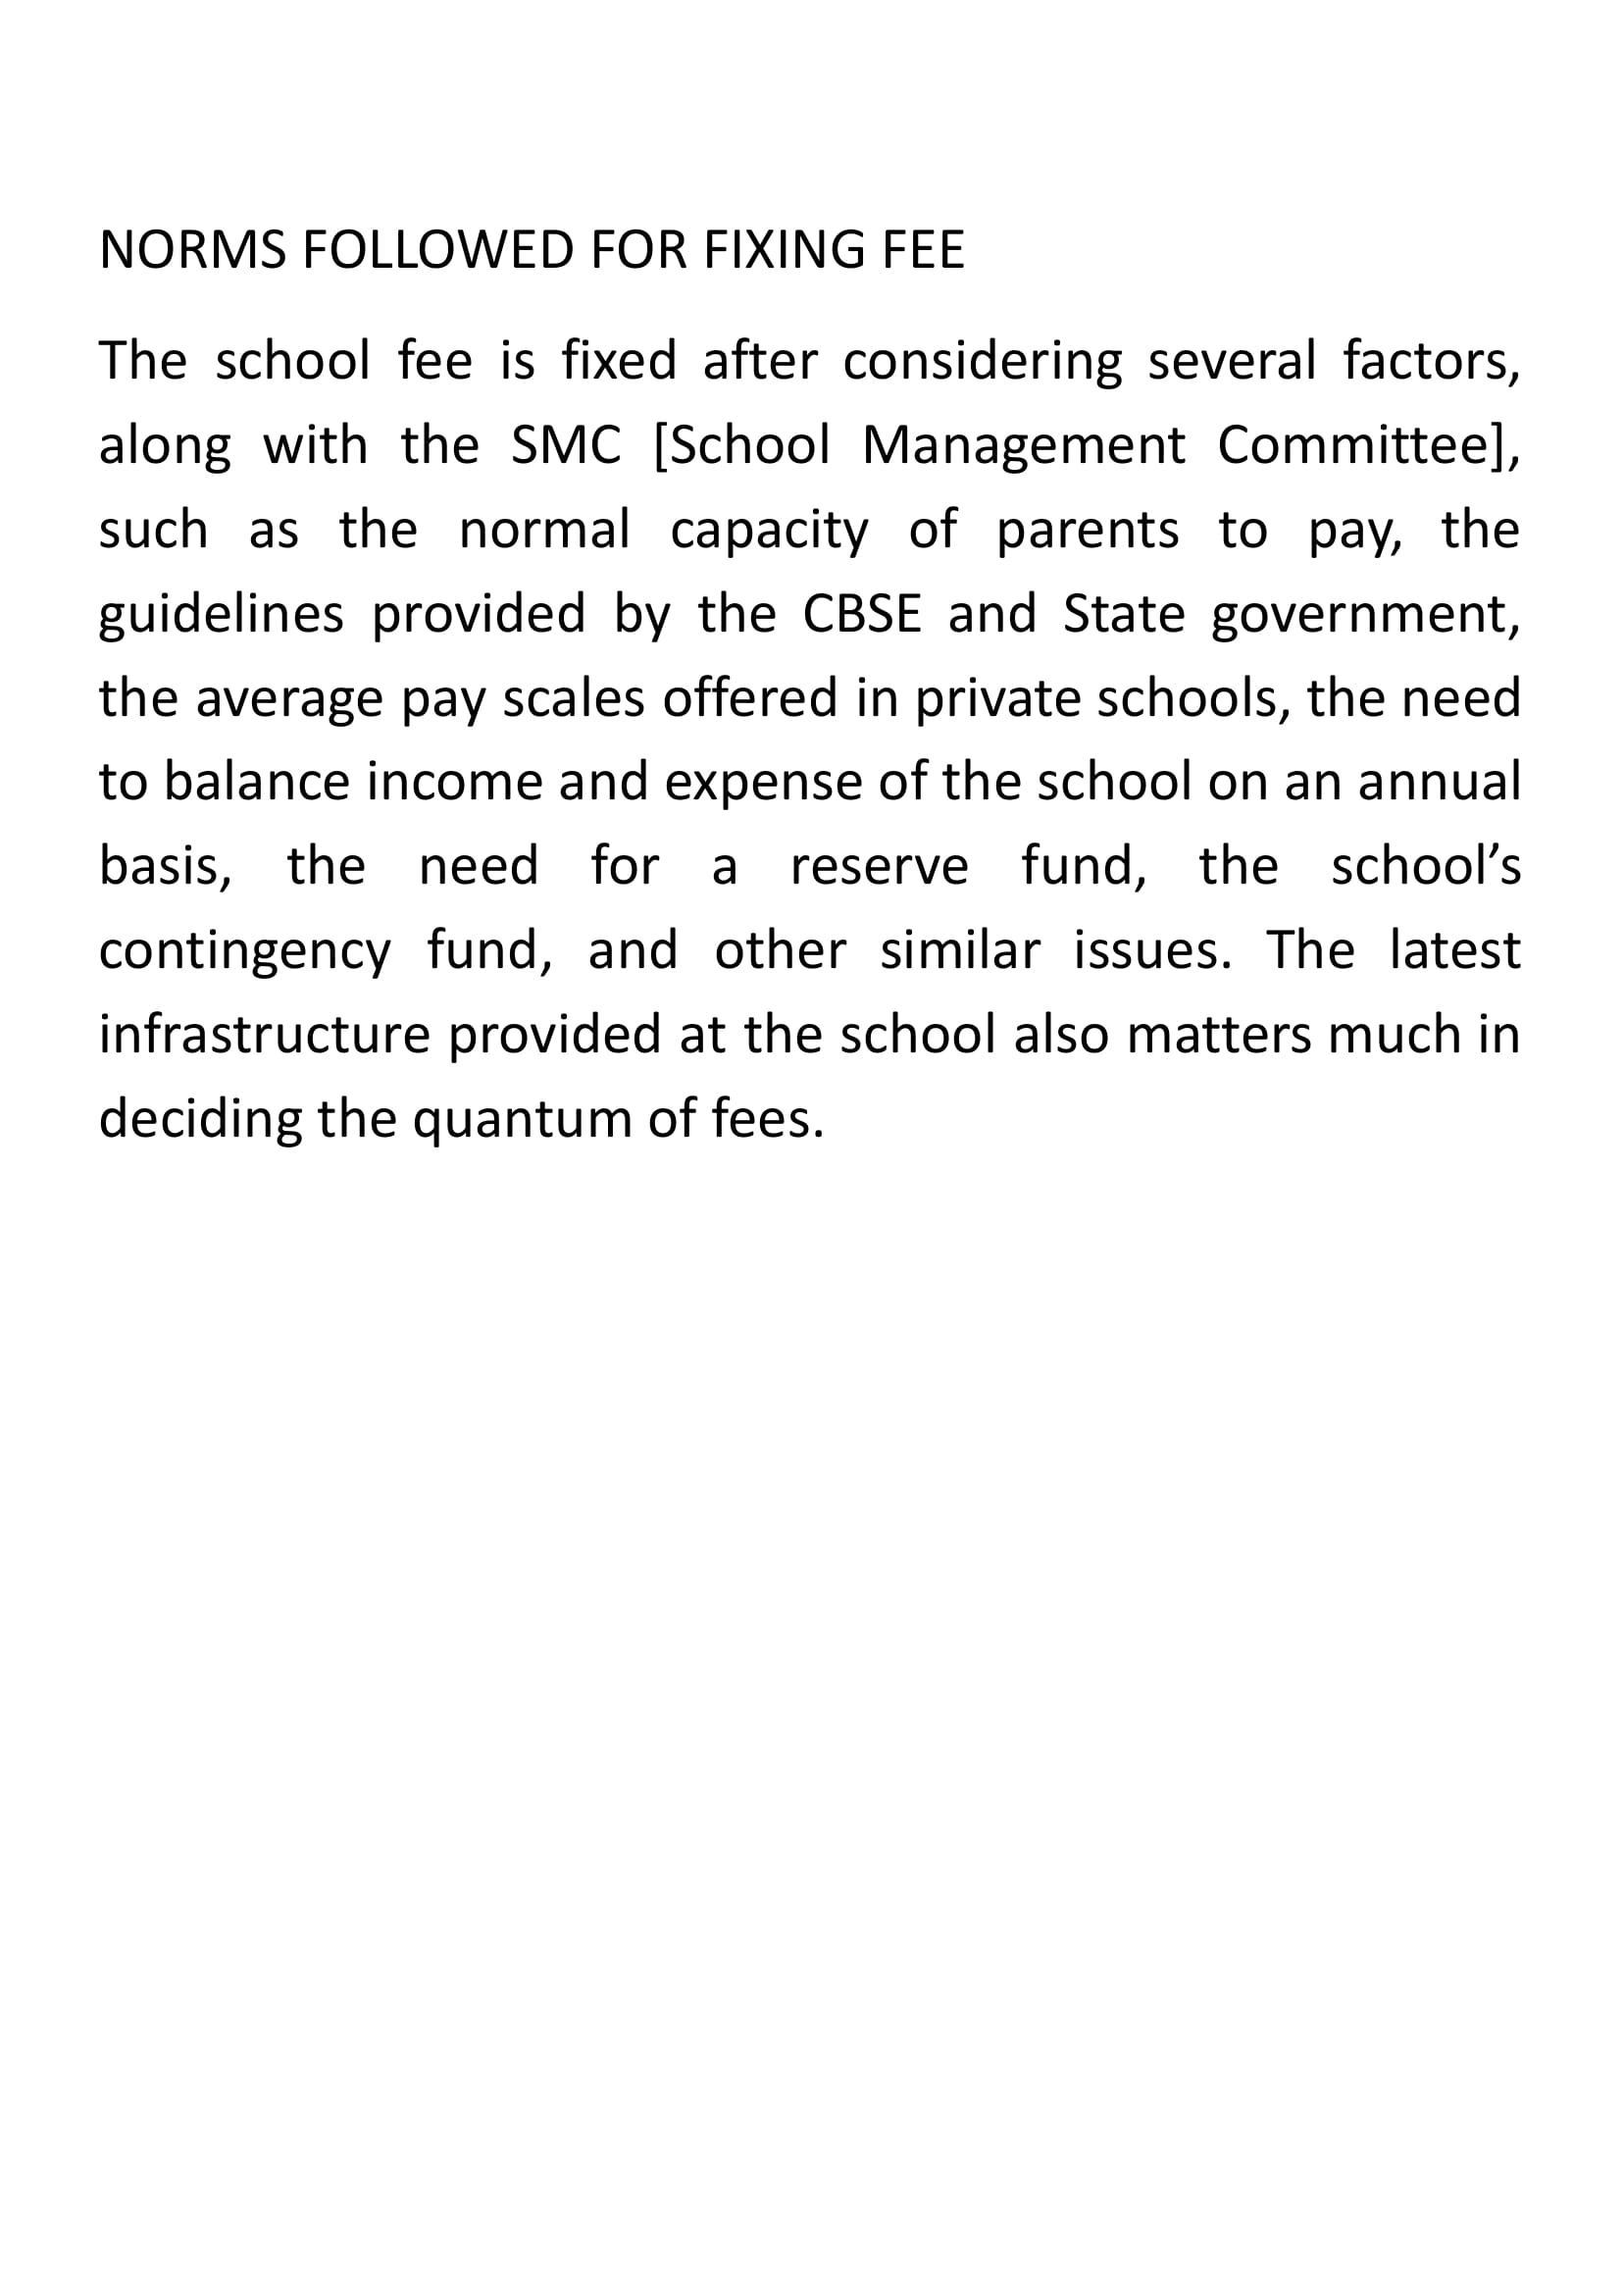 NORMS FOLLOWED FOR FIXING FEE